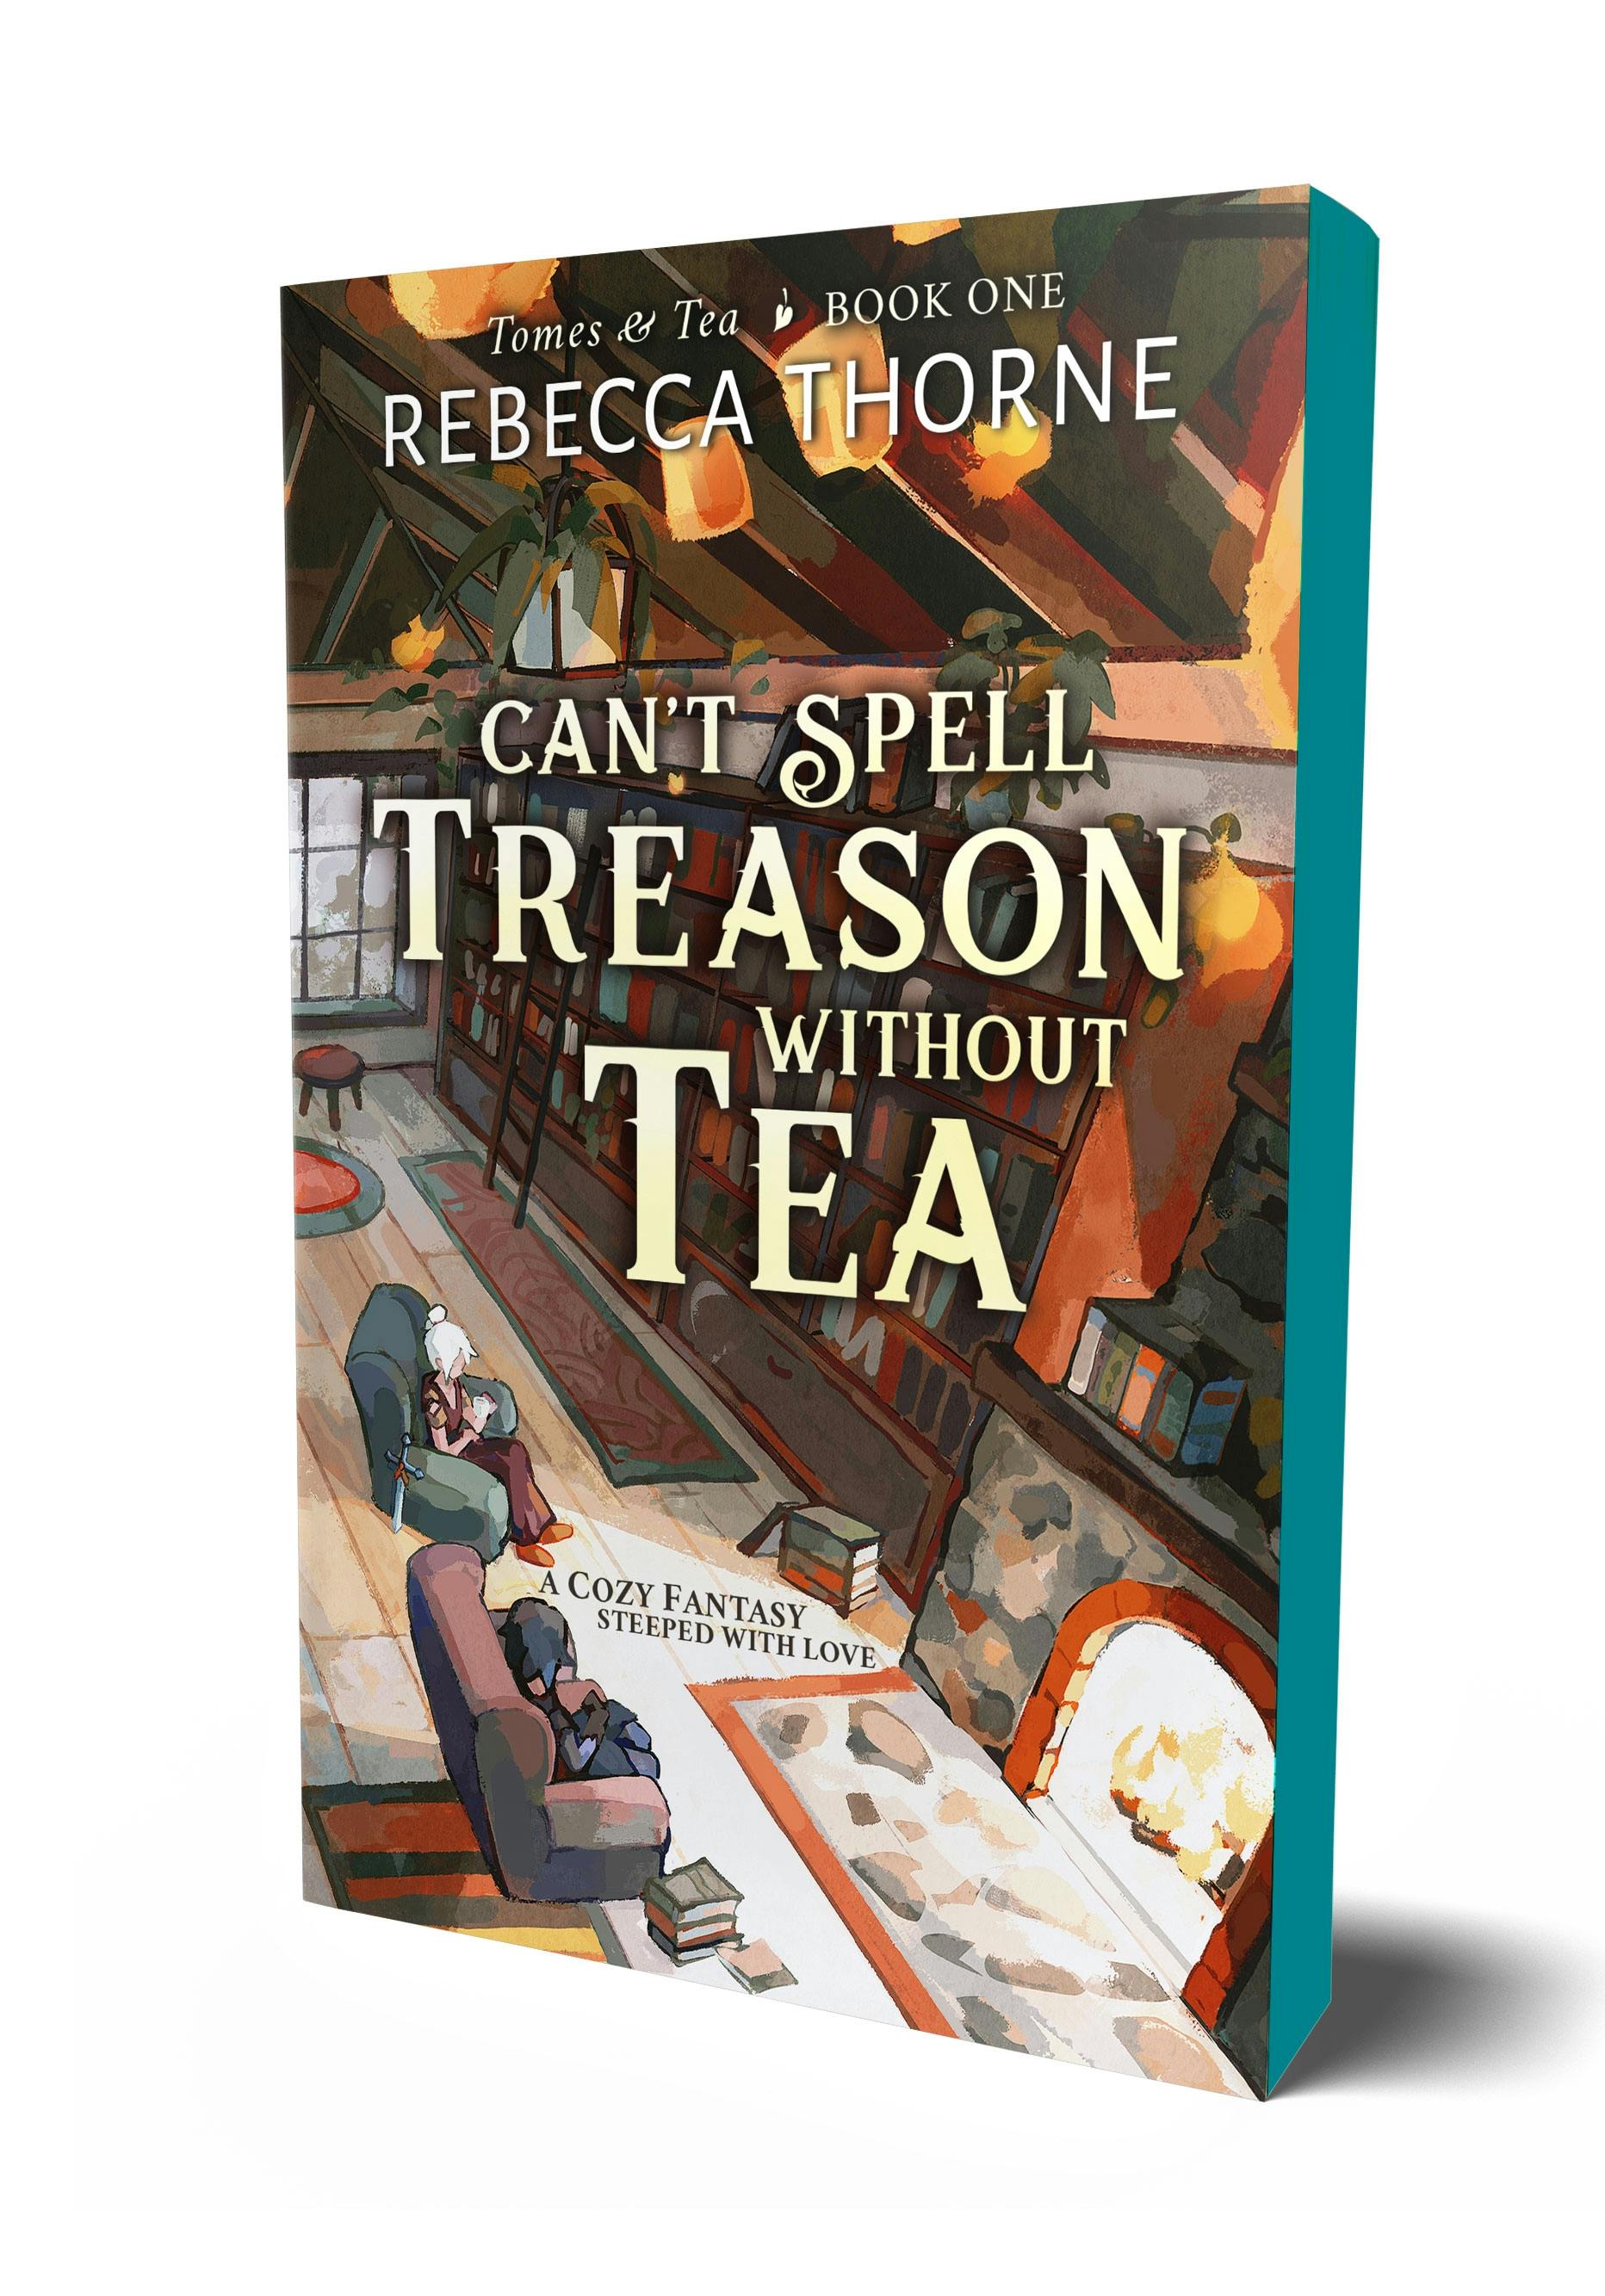 Cover for the book titled as: Can't Spell Treason Without Tea